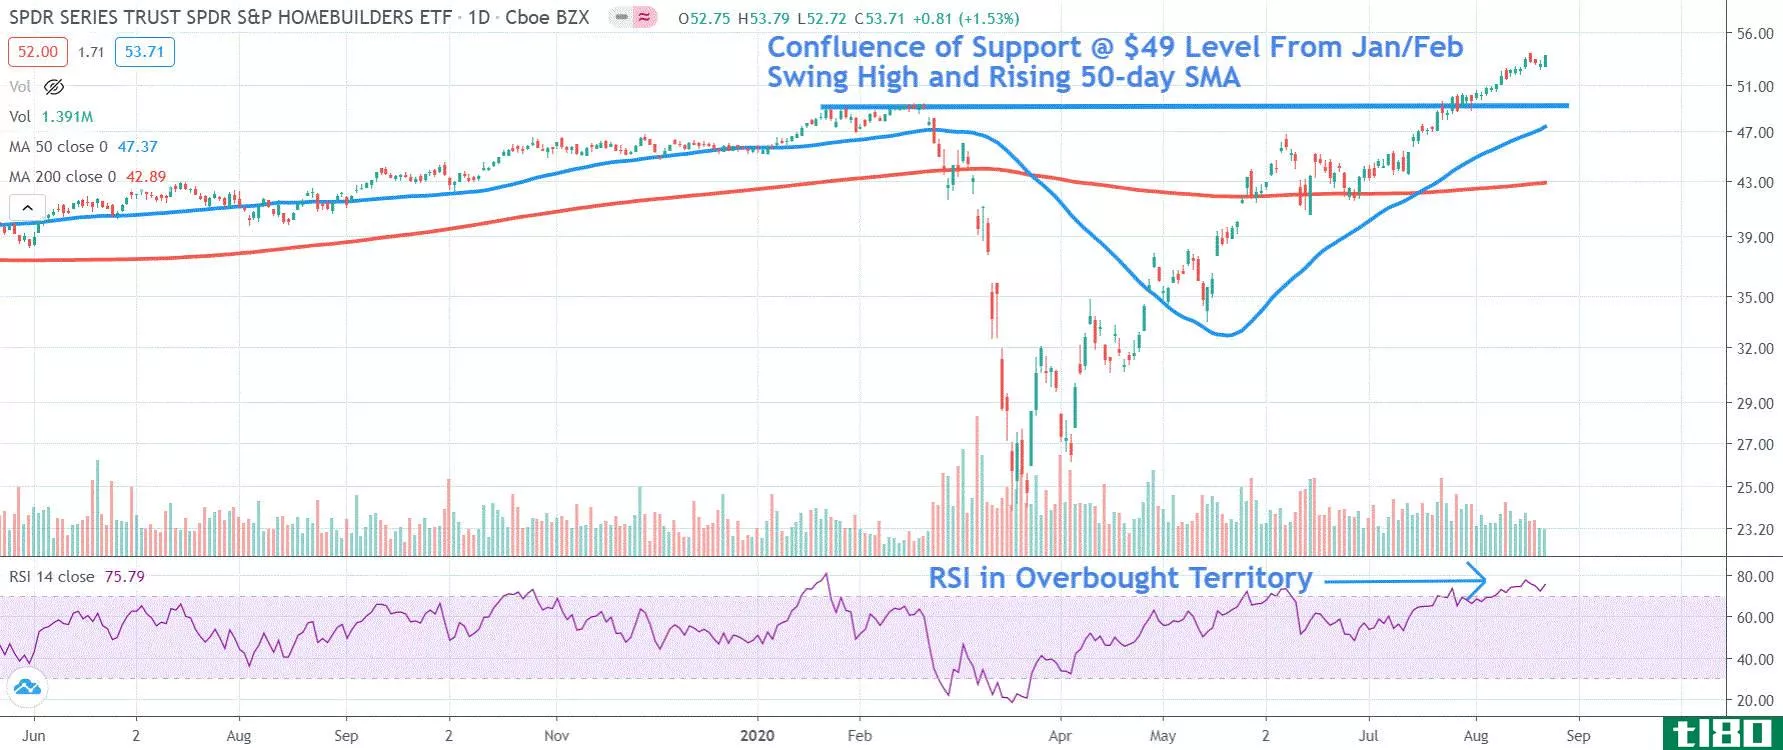 Chart depicting the share price of the SPDR S&P Homebuilders ETF (XHB)